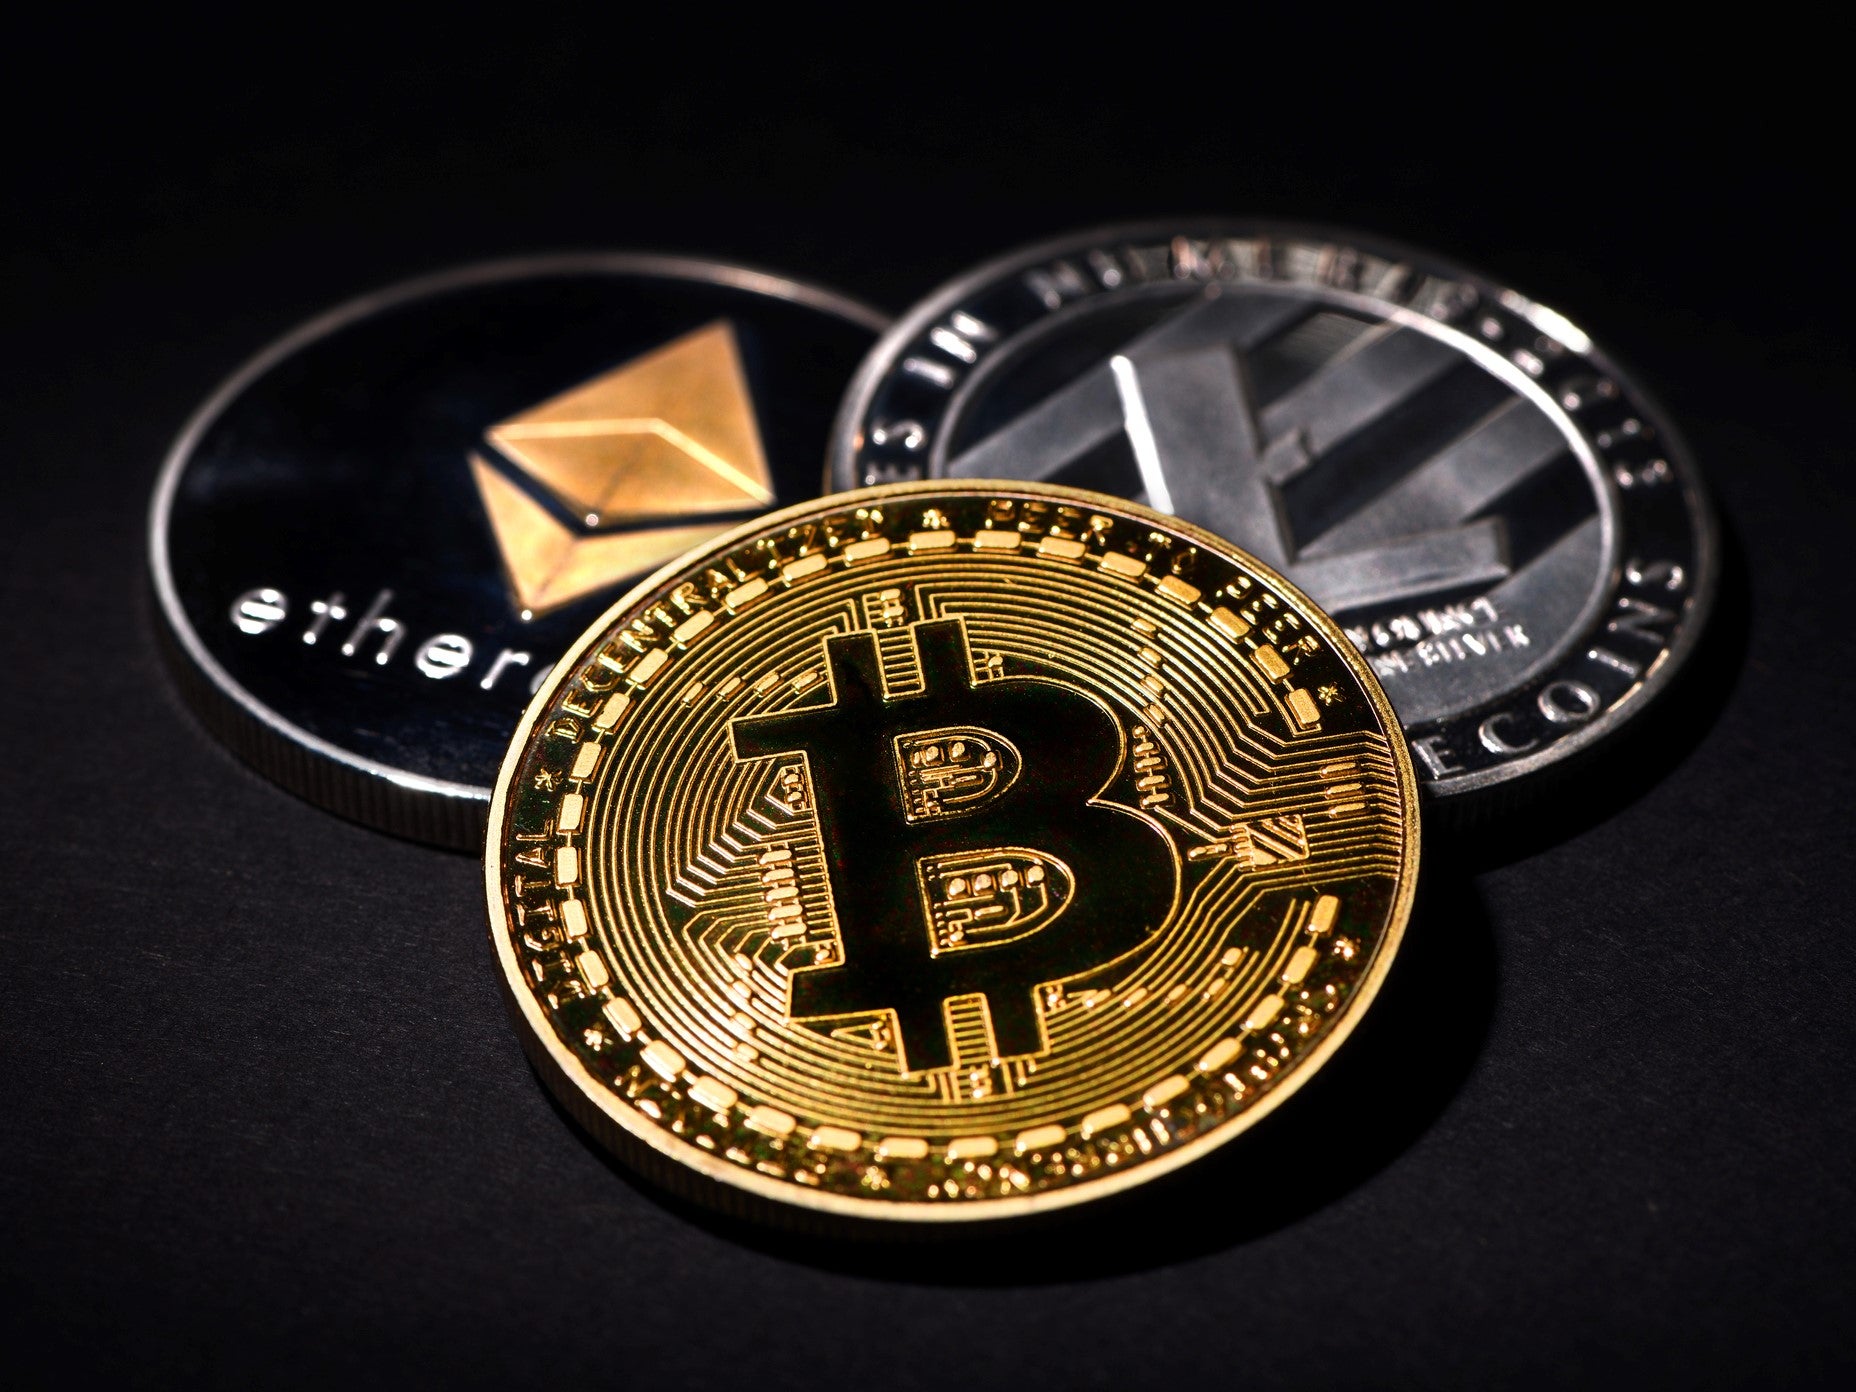 June 2021 has been a rocky month for bitcoin and other leading cryptocurrencies